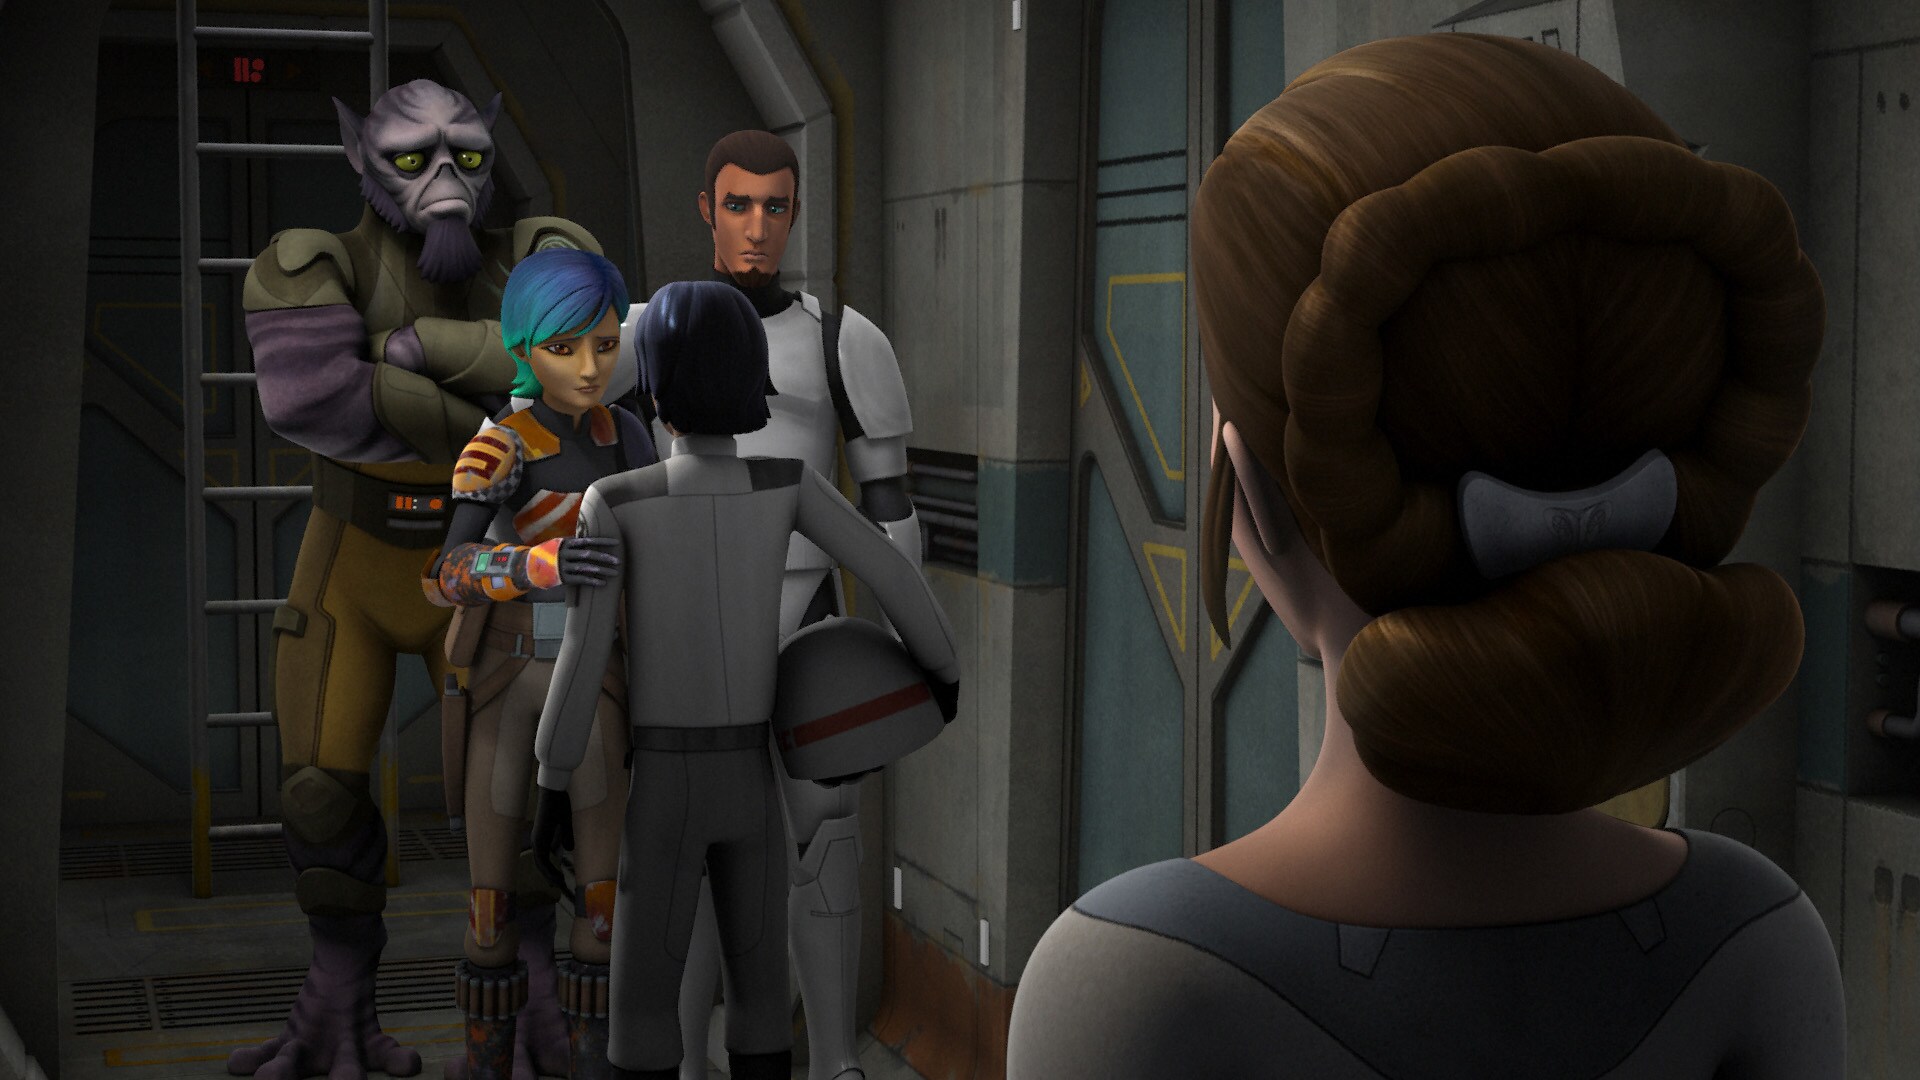 Later, Leia watches as the team comforts Ezra. "Maybe he could use a friend," Kanan tells her.